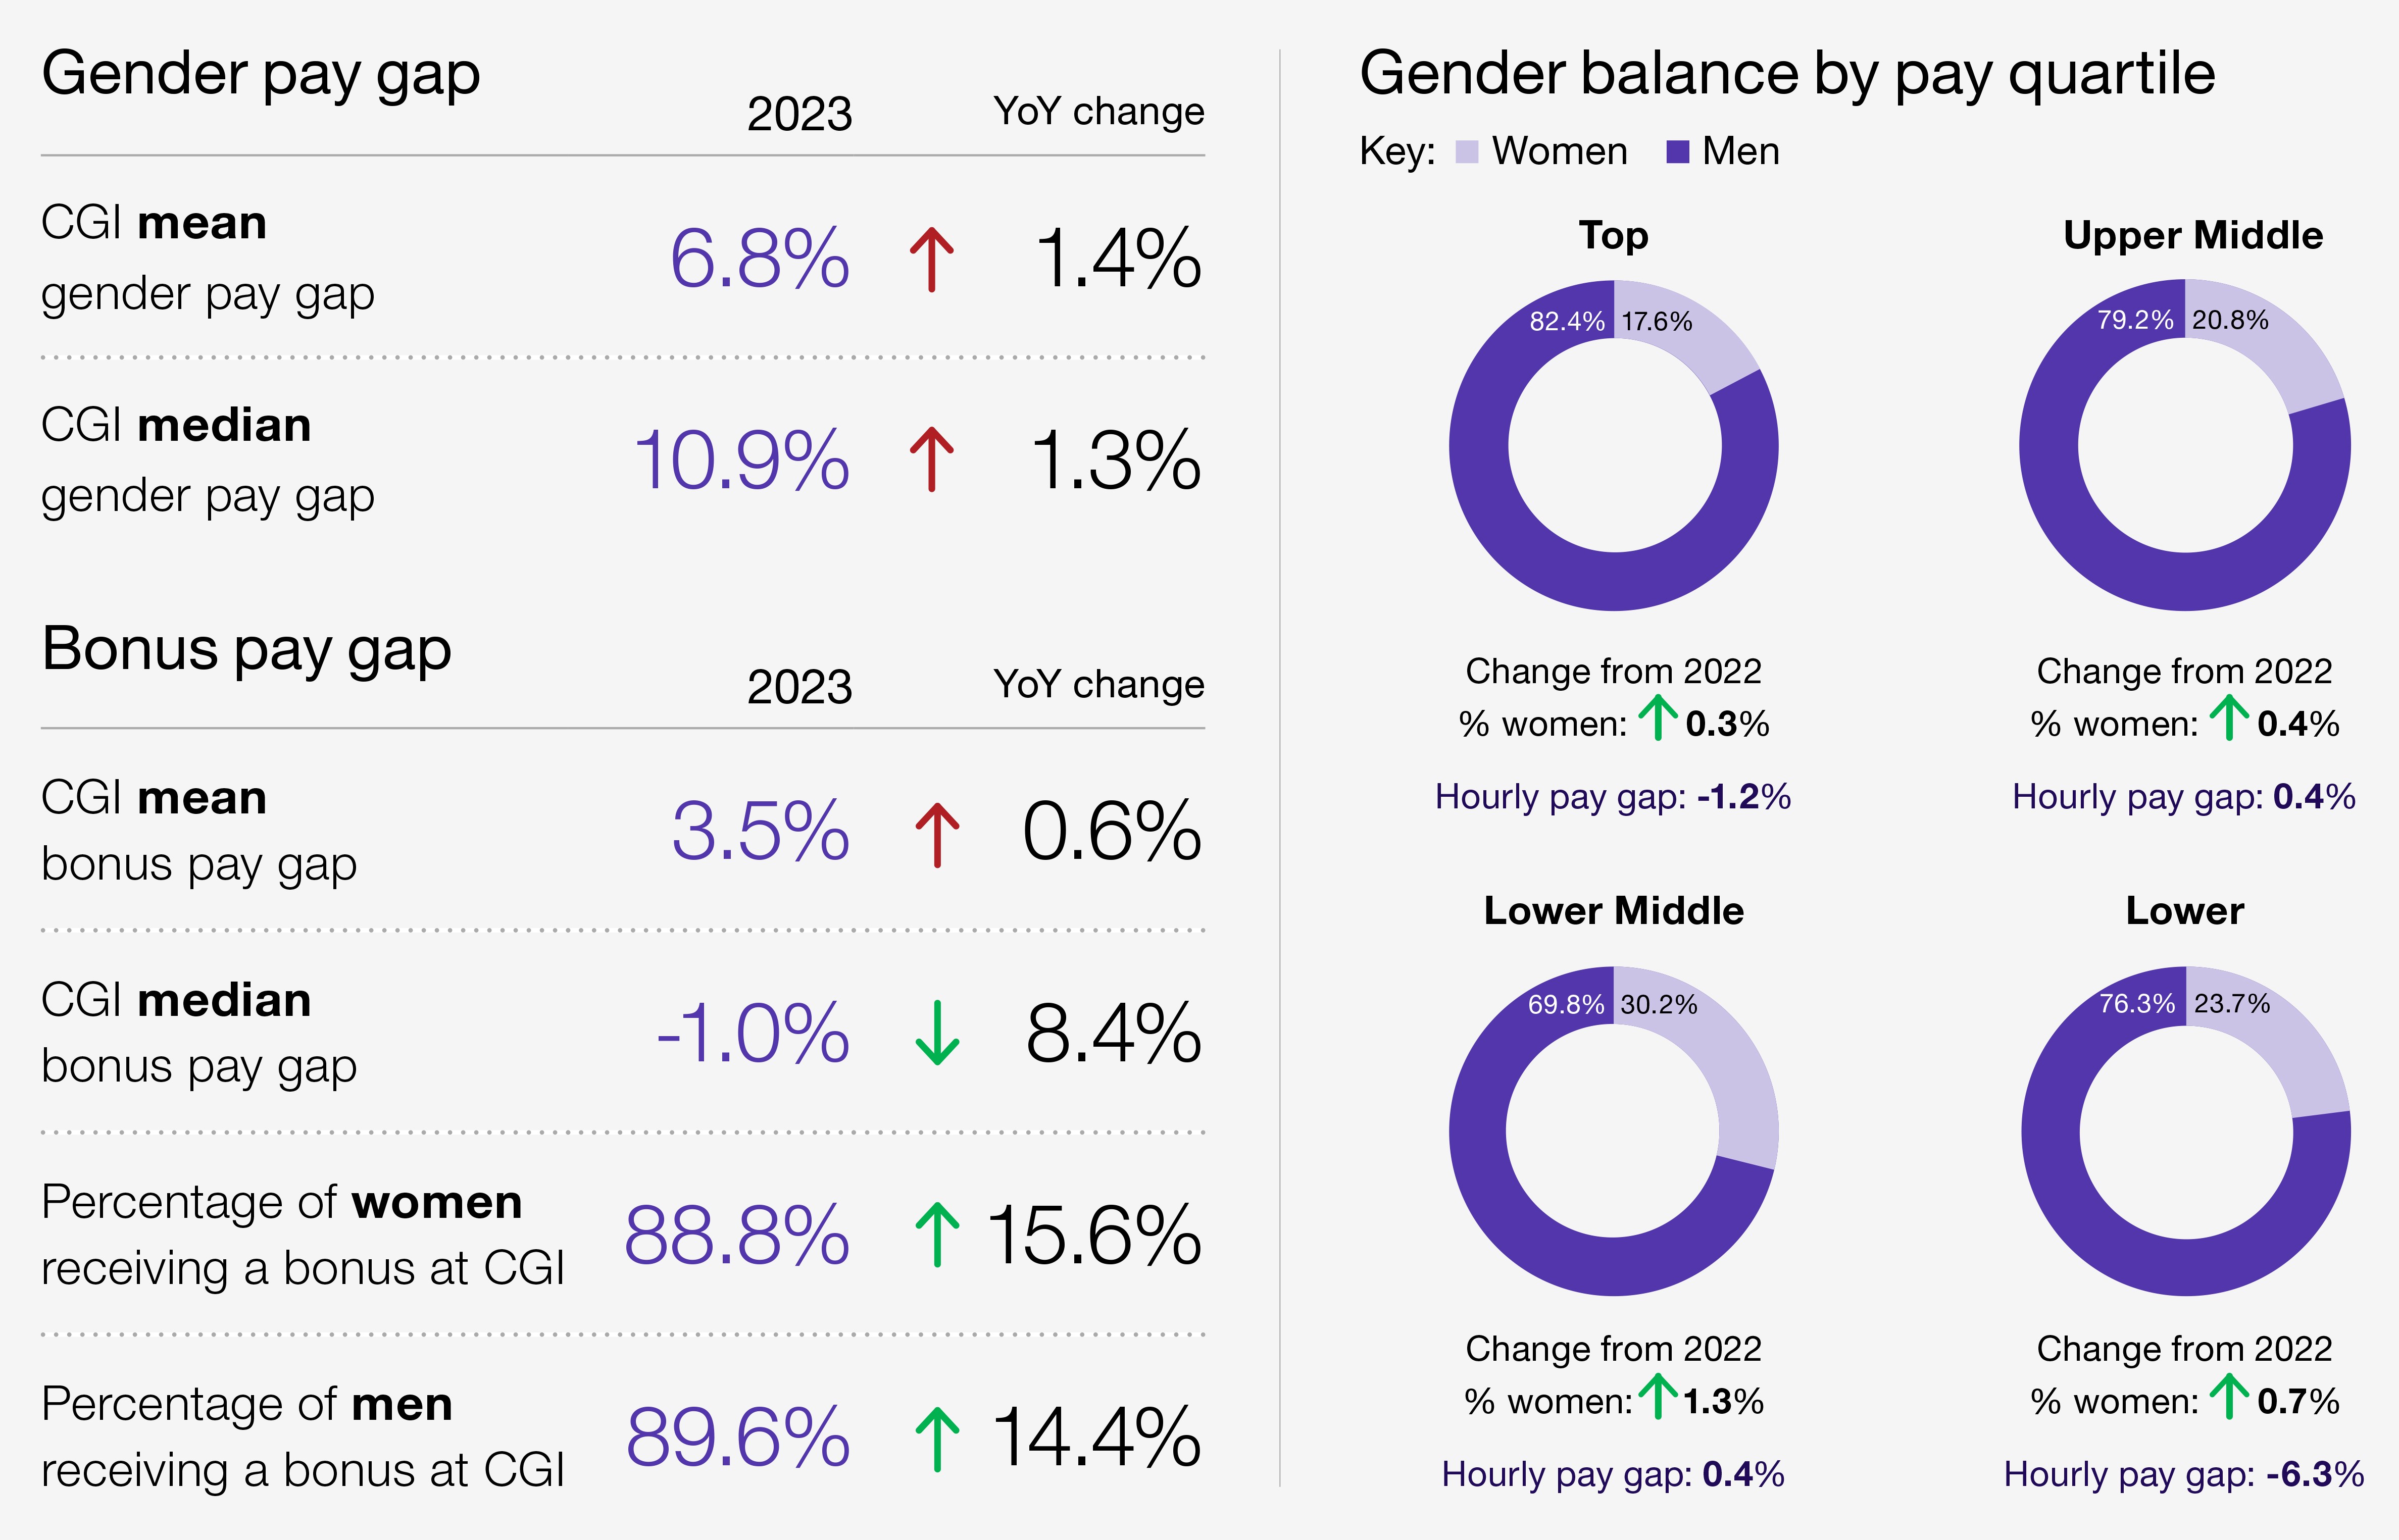 CGI UK Gender Pay Gap Report 2023 top level results graphic